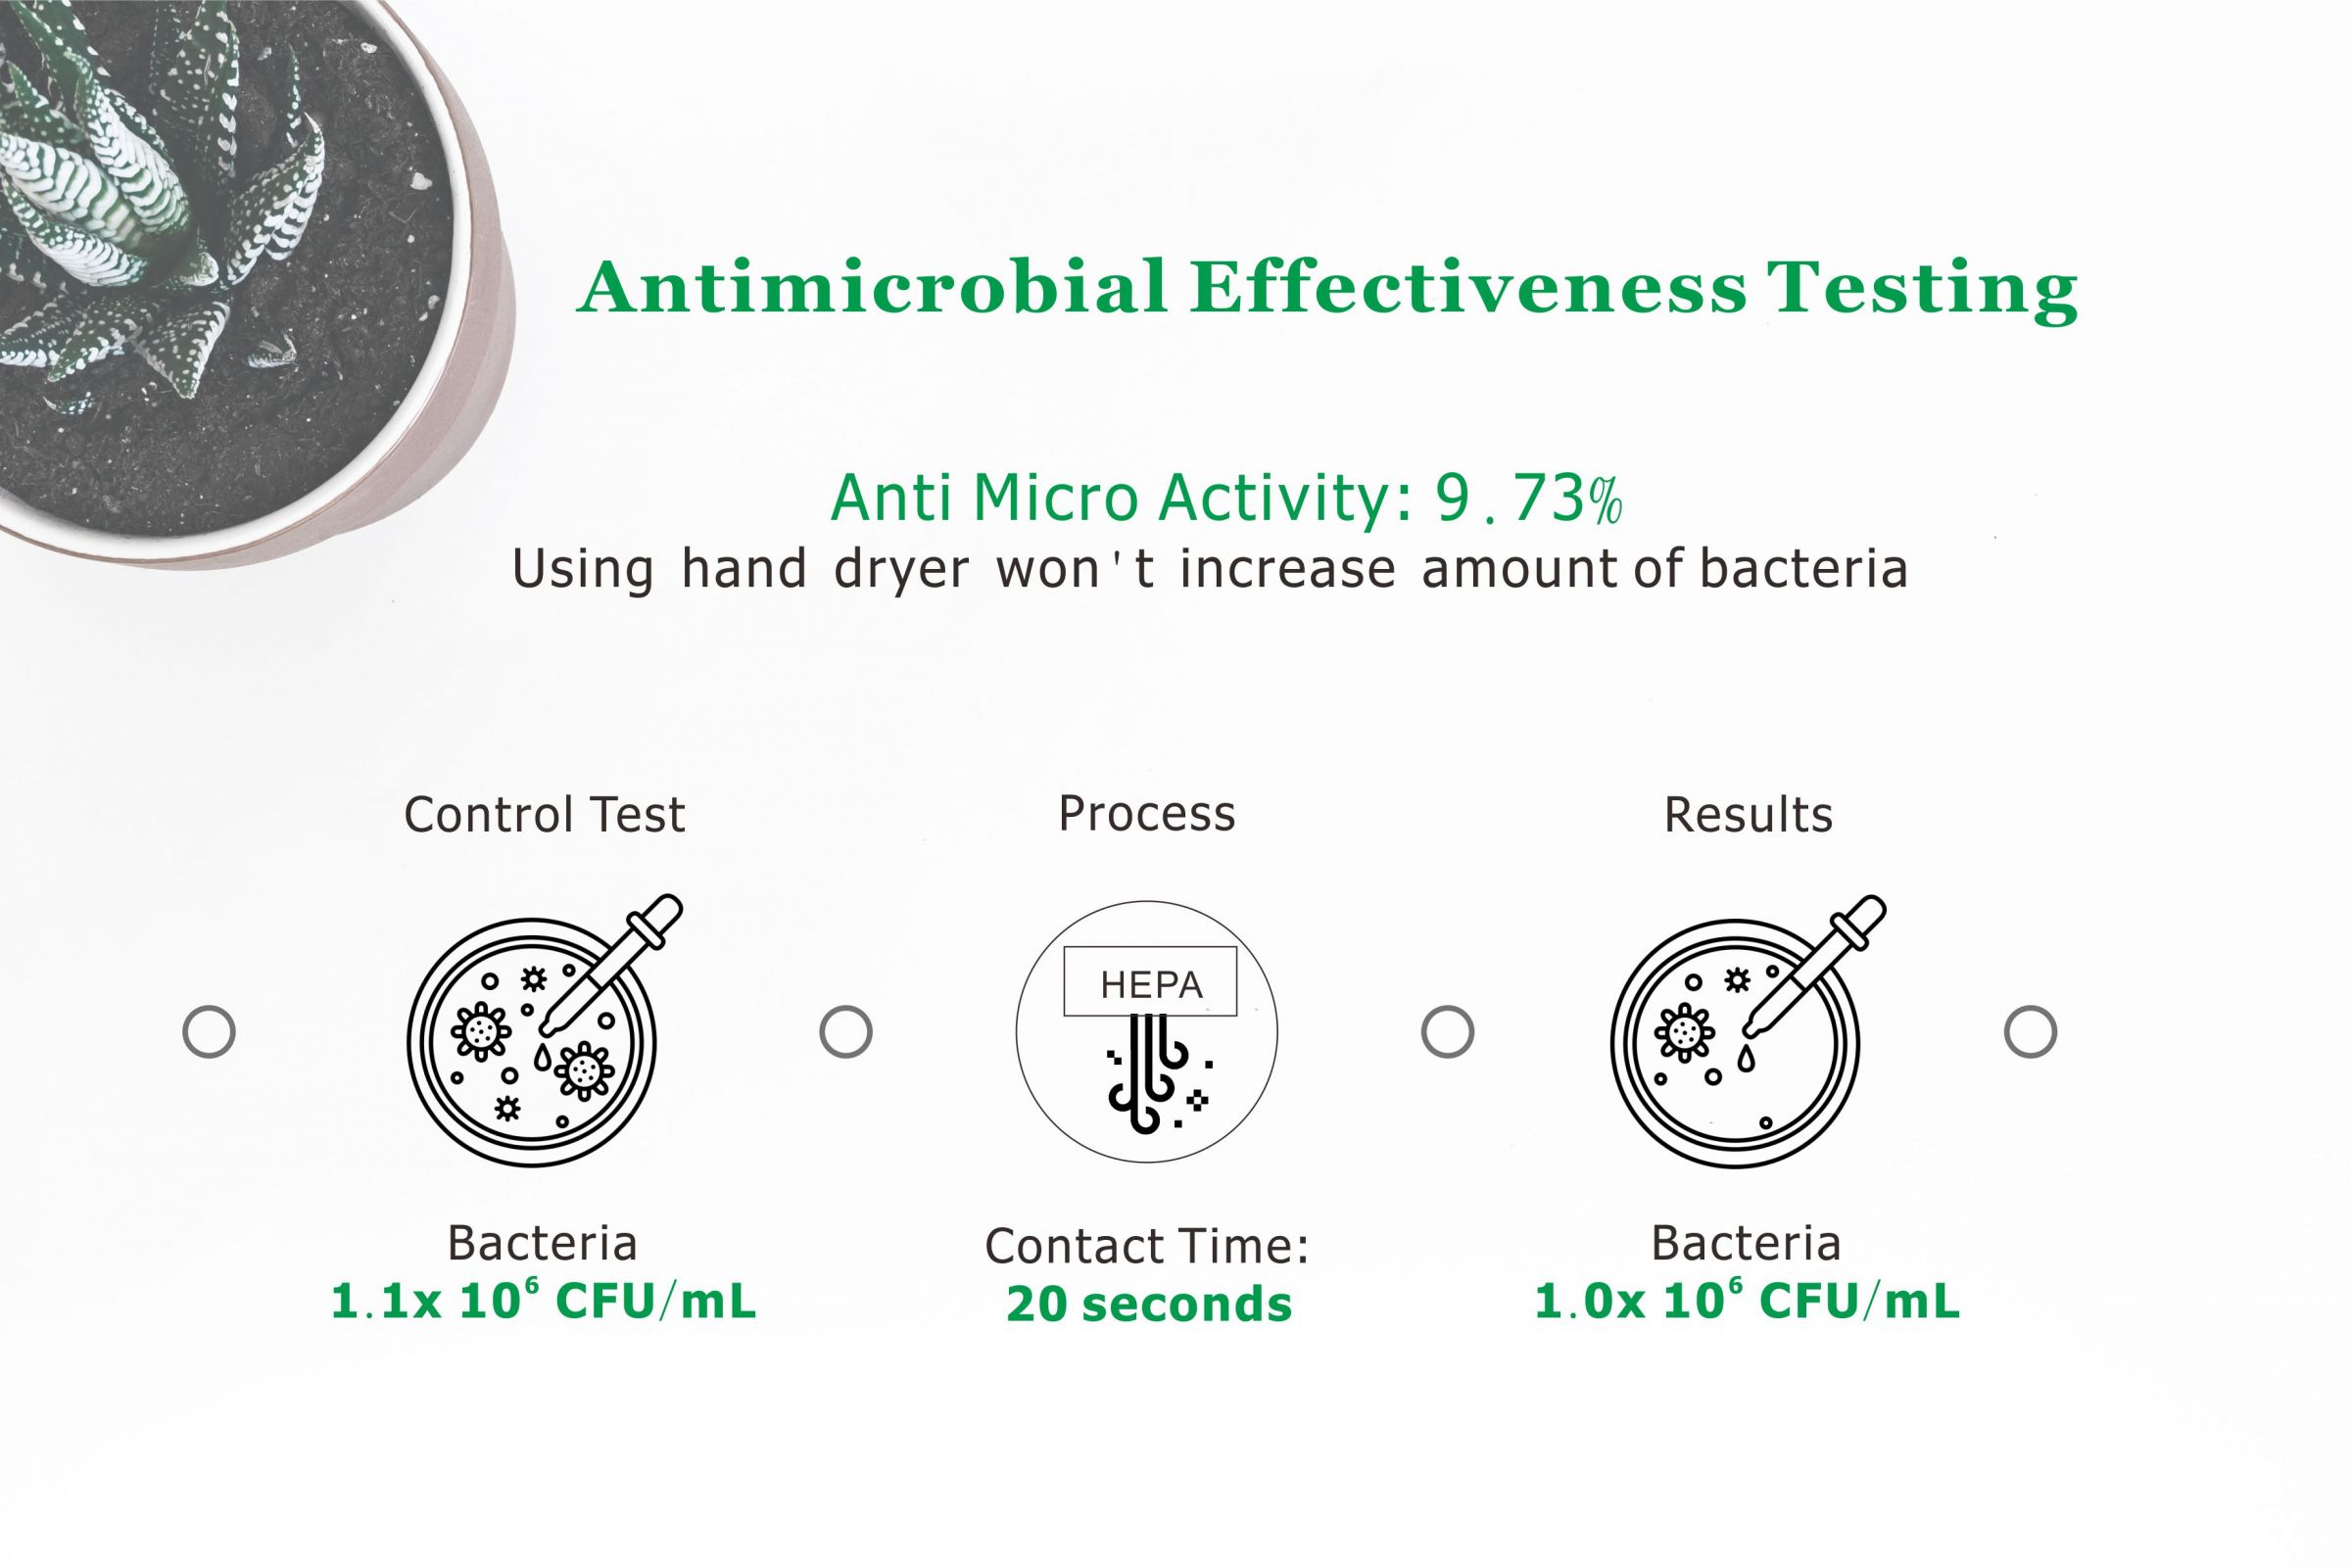  Antimicrobial Effectiveness Testing